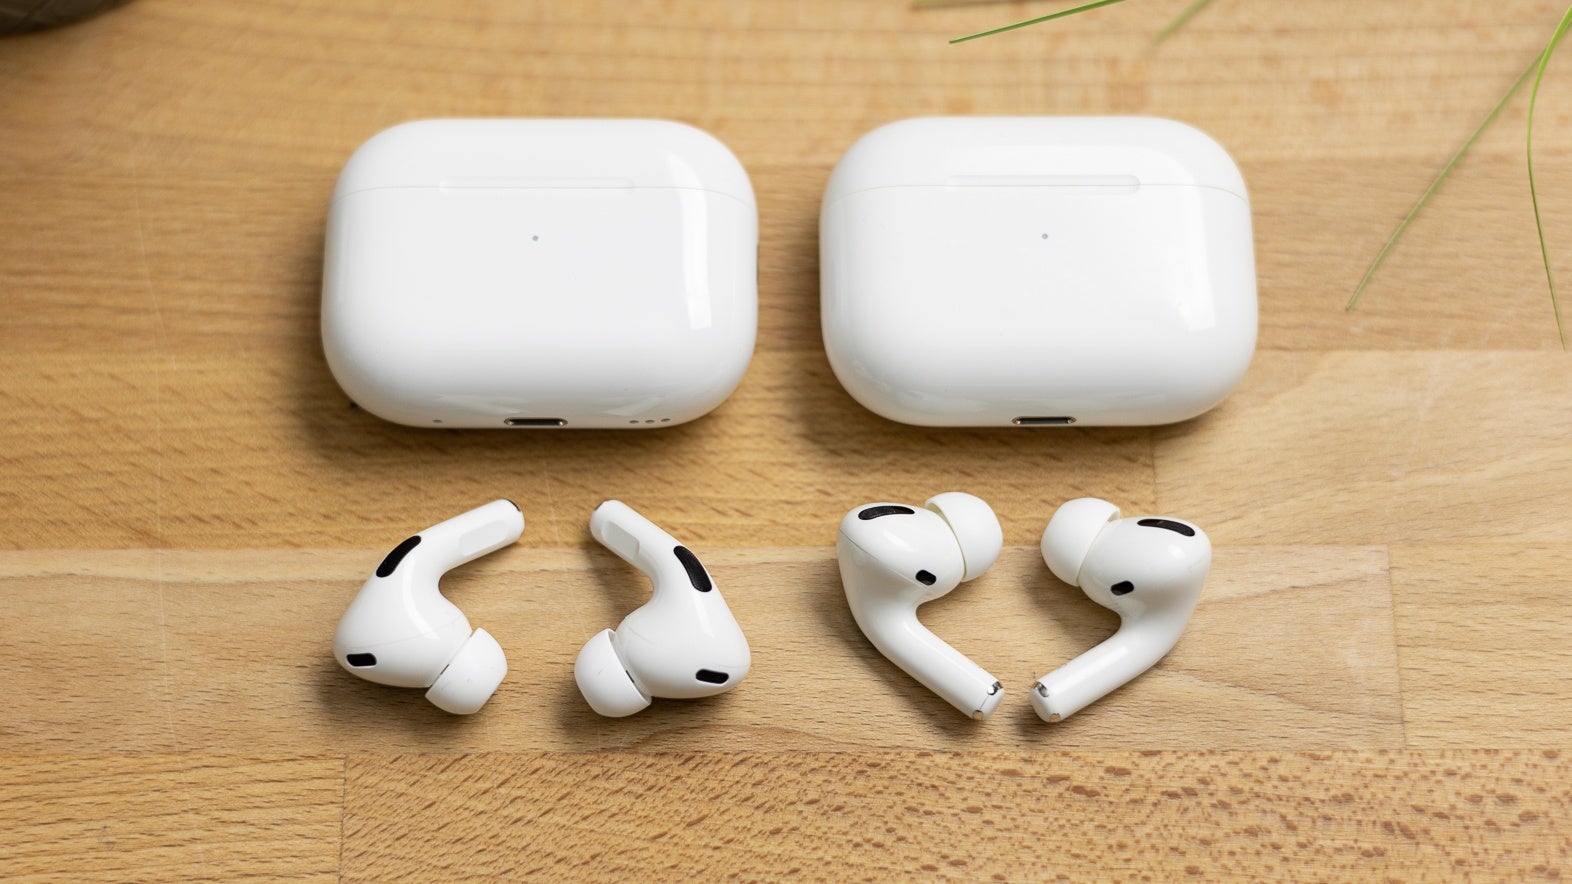 AirPods Pro 2 vs AirPods Pro comparison: What's different?